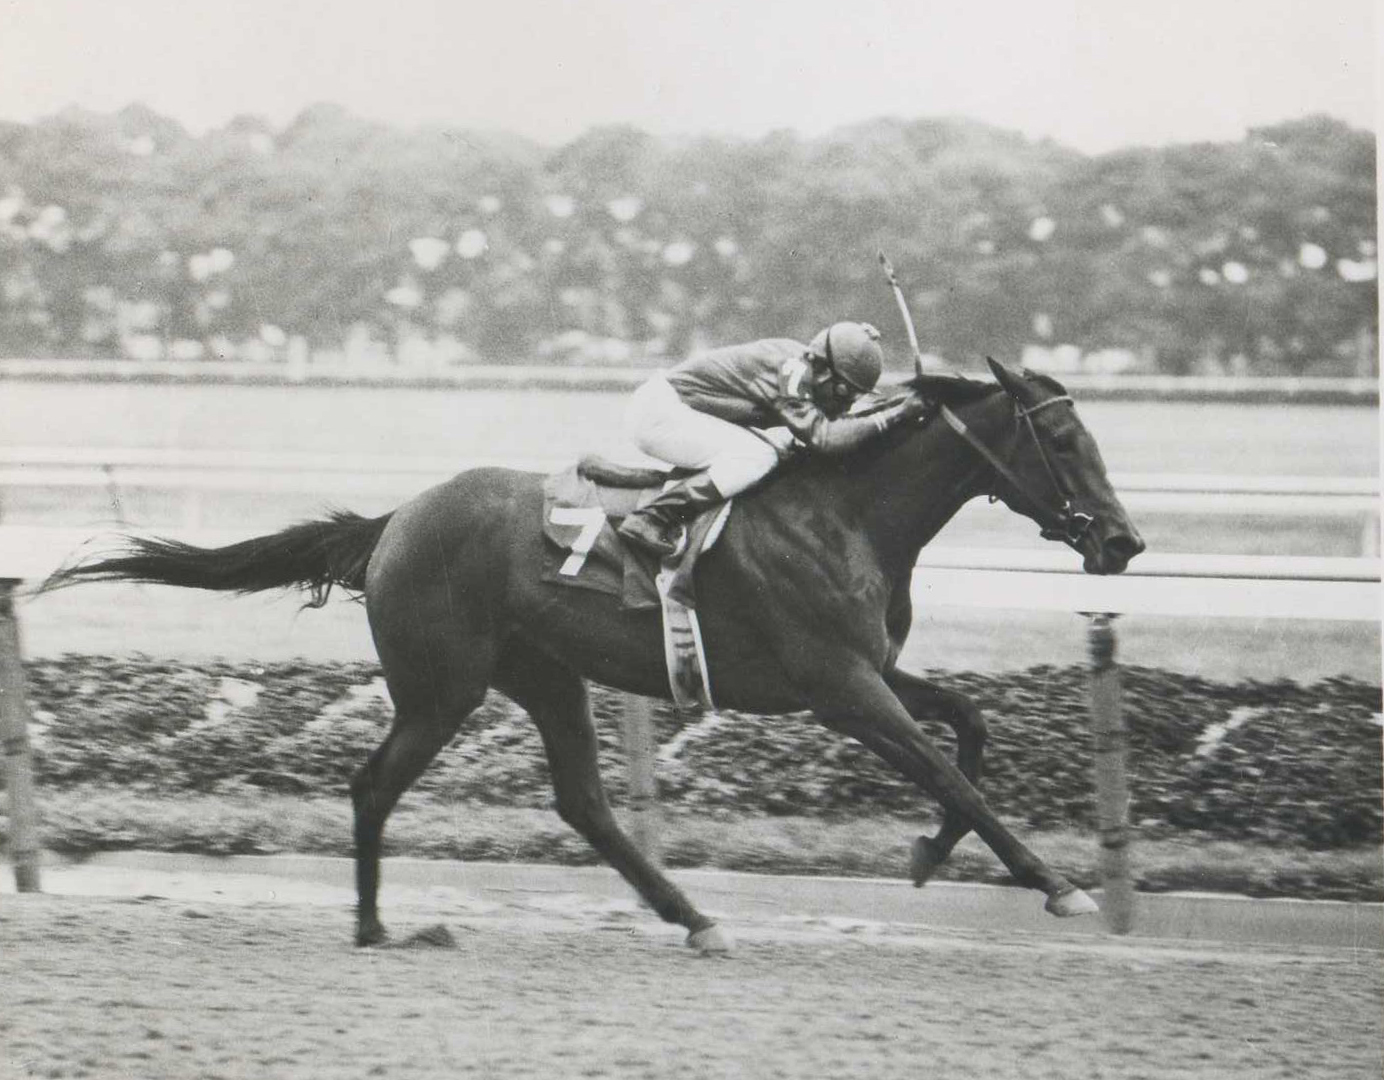 Davona Dale with Jorge Velasquez up in 1979 (NYRA/Photo Communcations /Museum Collection)